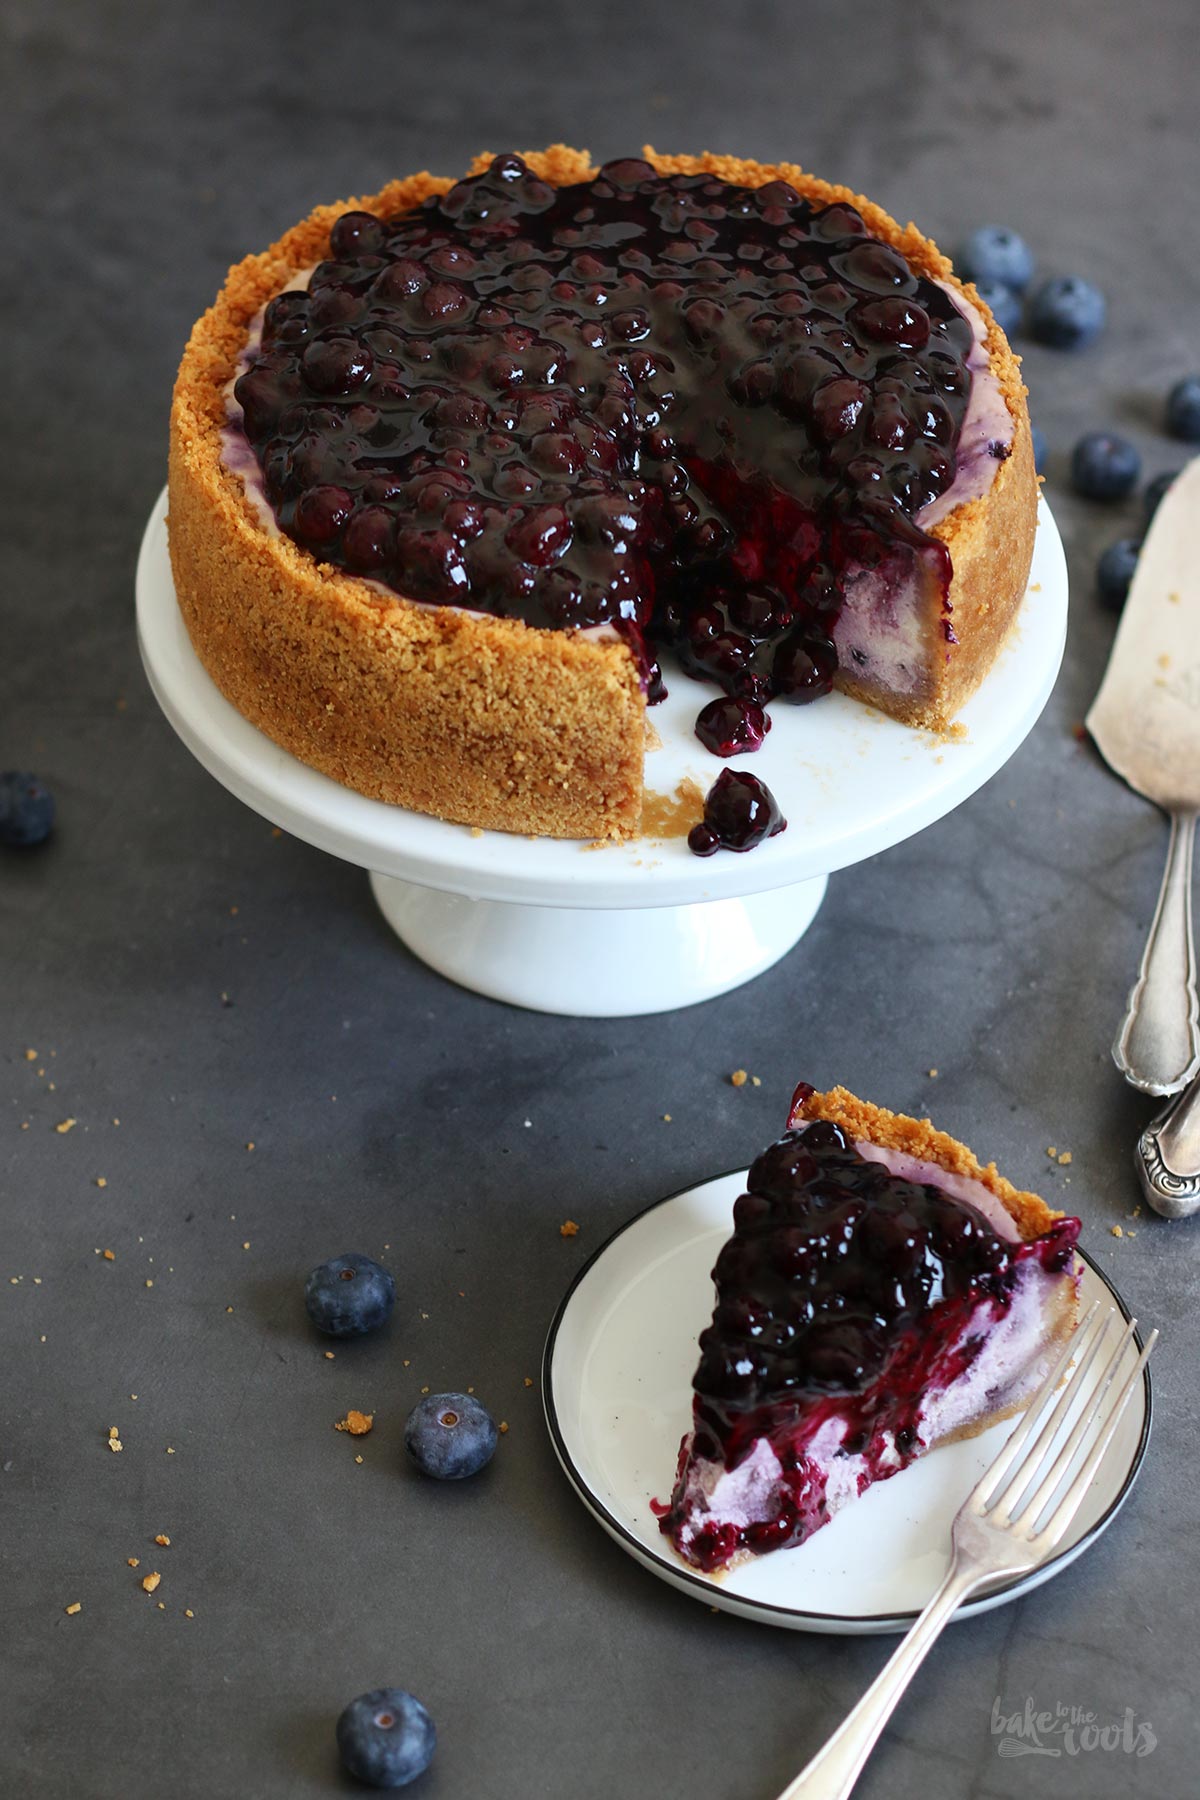 Blueberry Cheesecake (sugar-free) | Bake to the roots